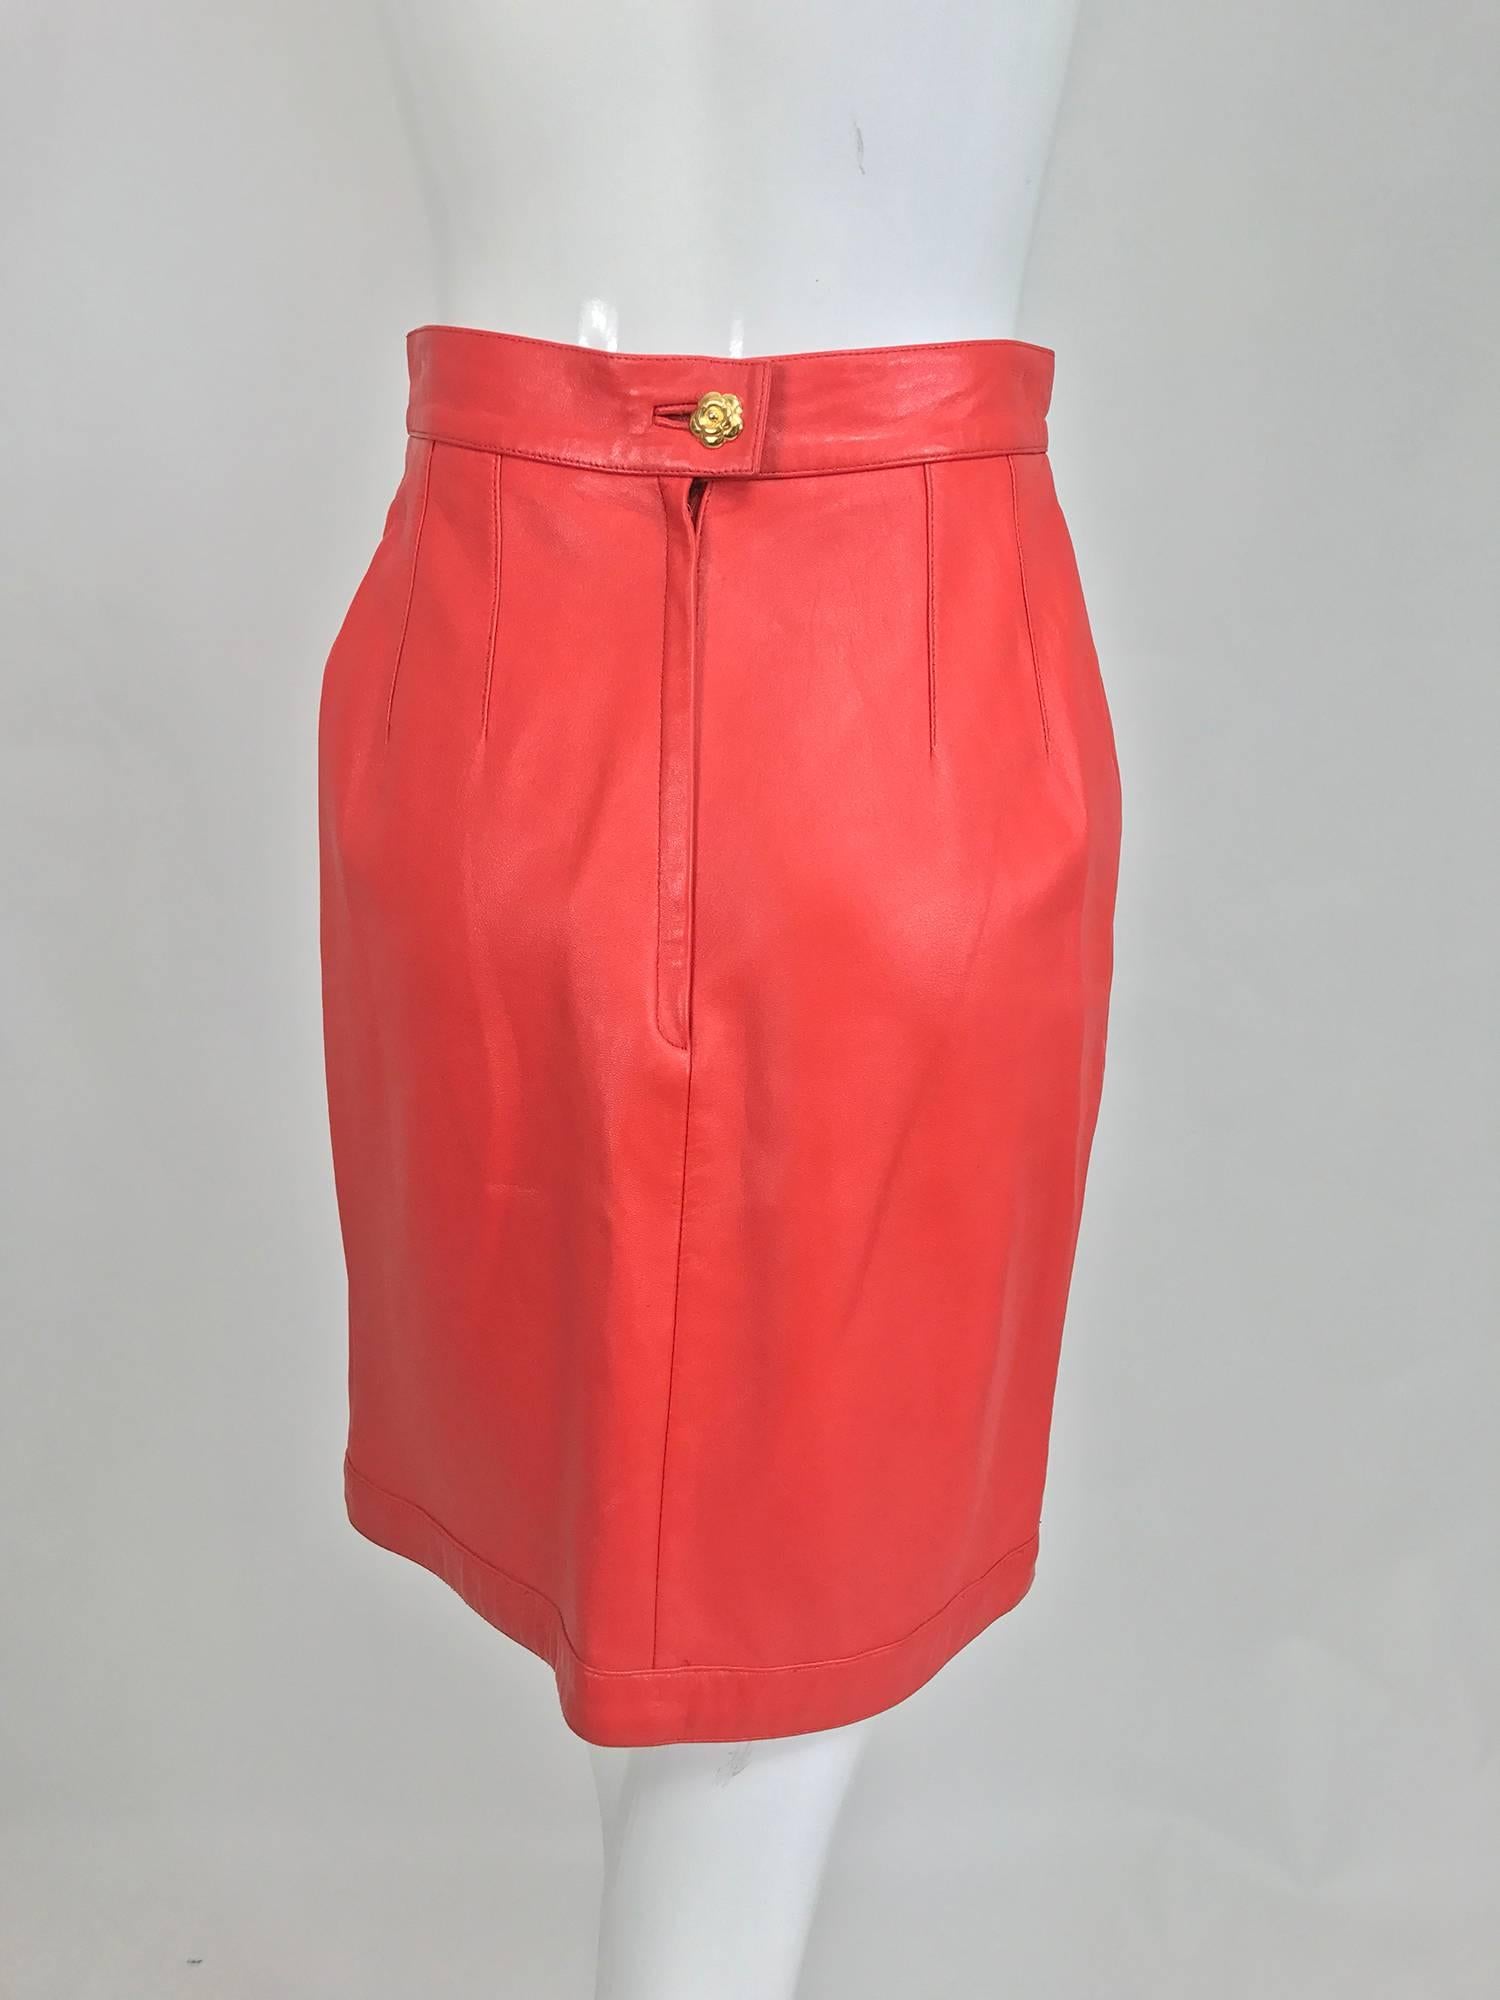 Women's Chanel Vintage 1990s coral red leather skirt with pockets